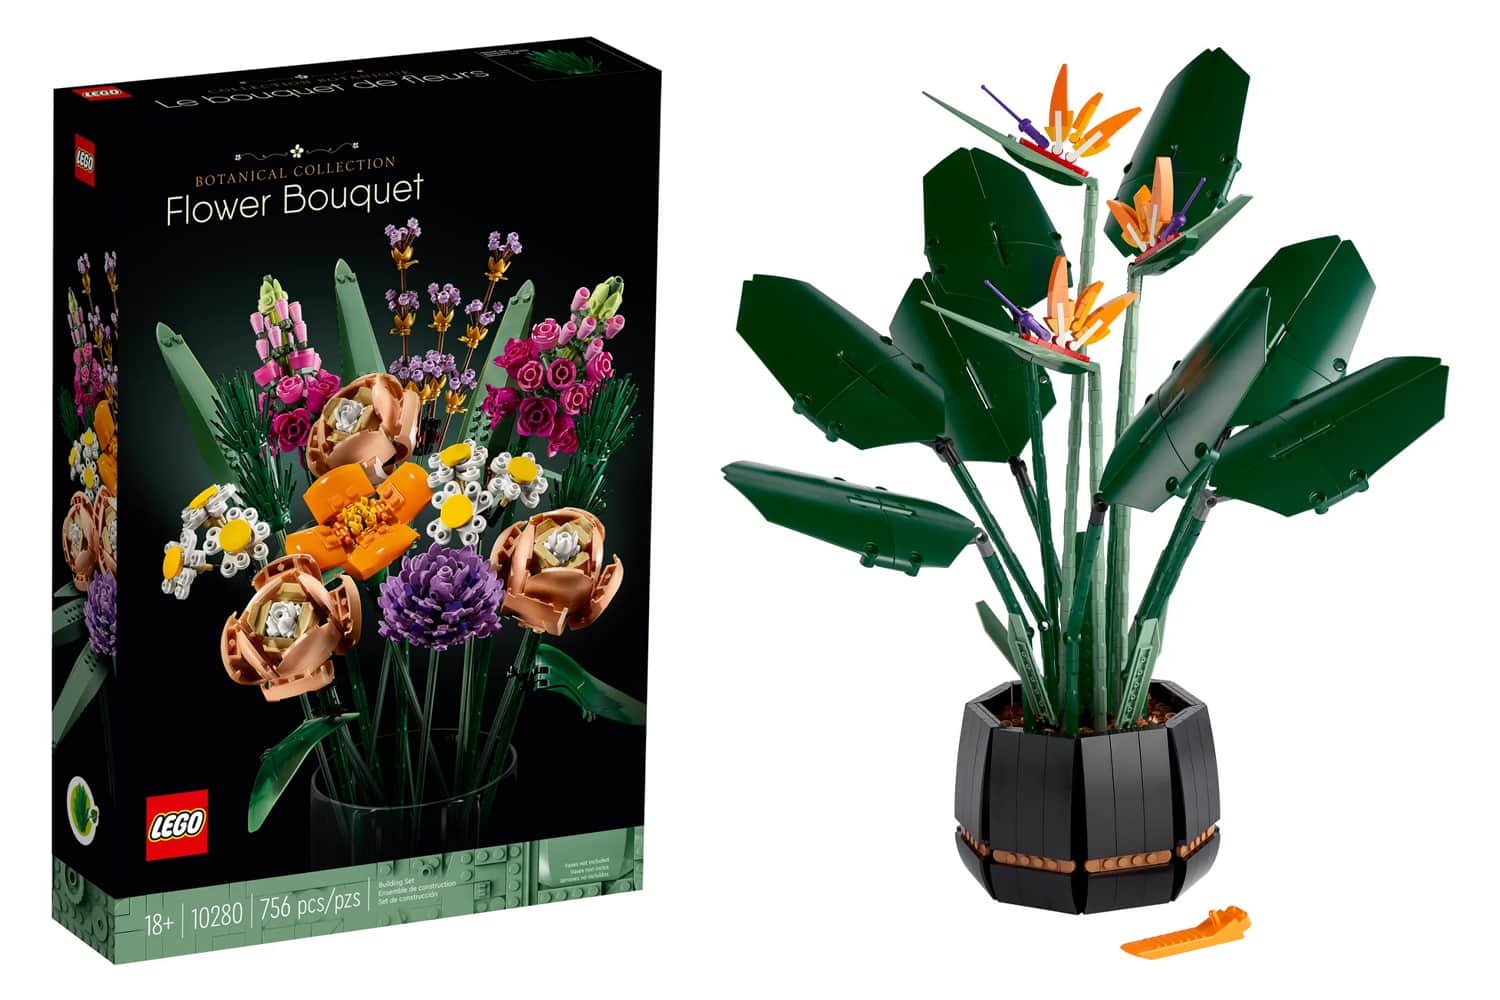 Your First Look at Lego's New Botanical Collection, lego botanical